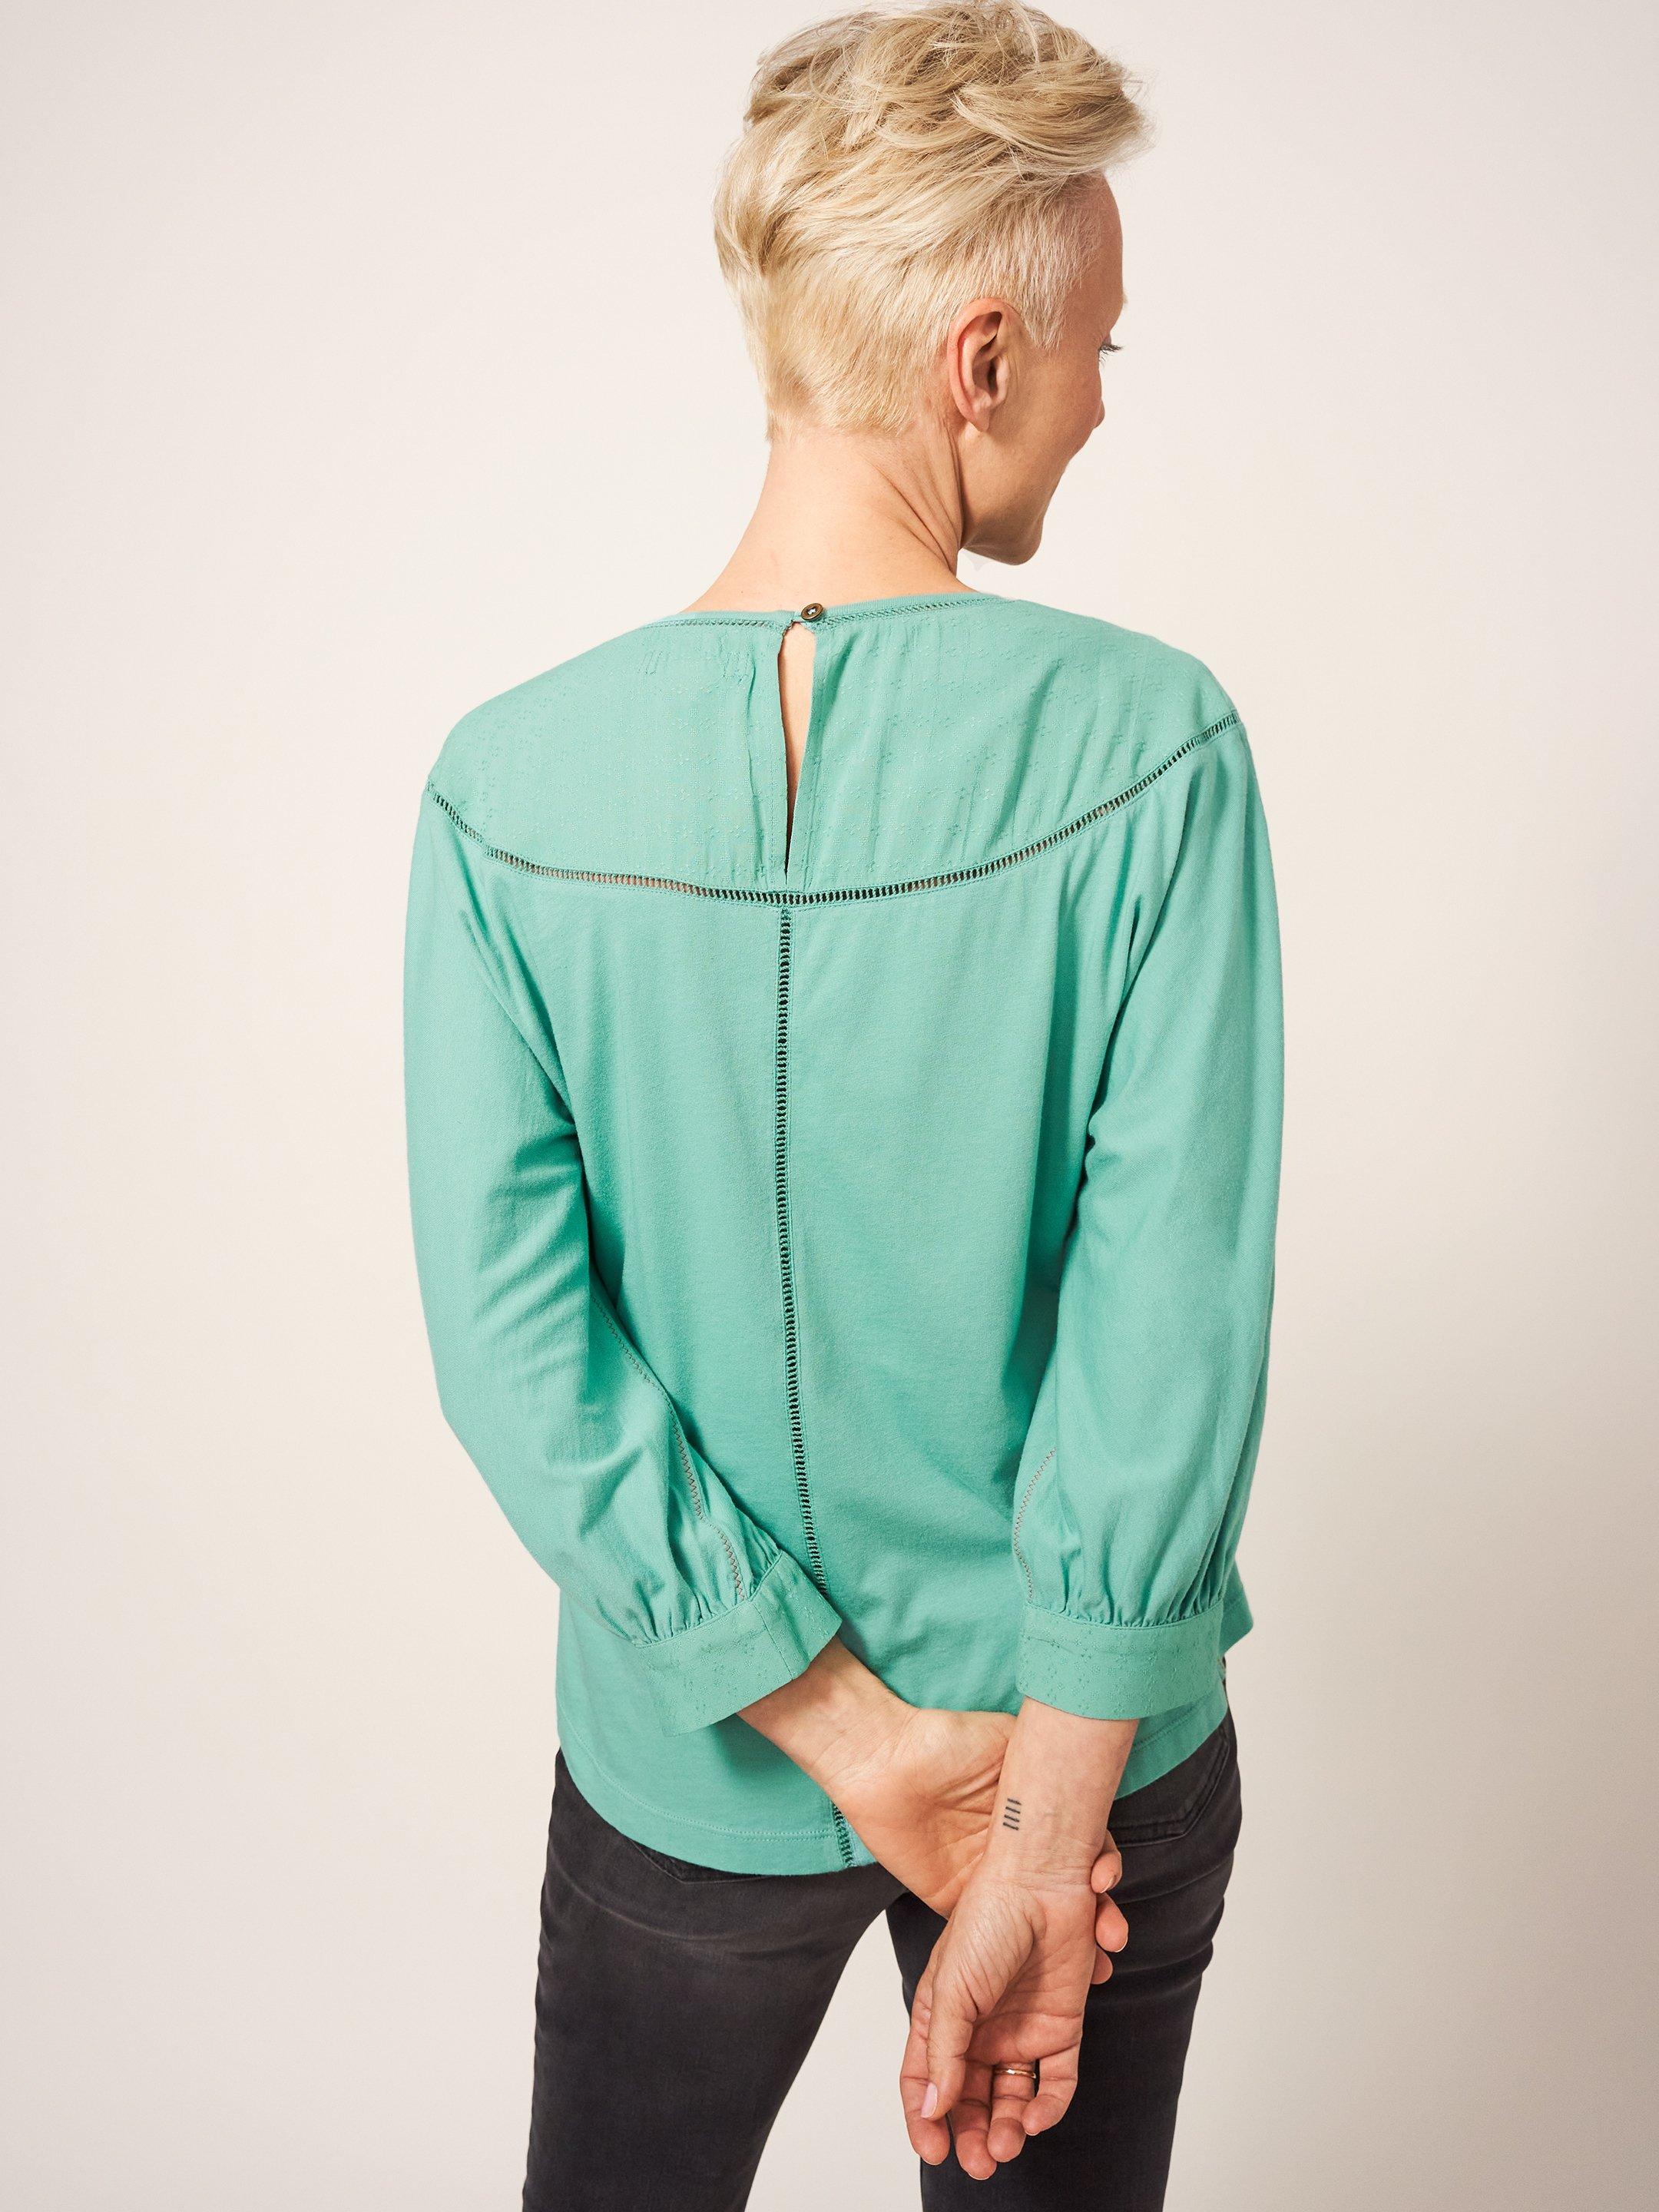 MOLLIE JERSEY MIX TOP in MID TEAL - MODEL BACK